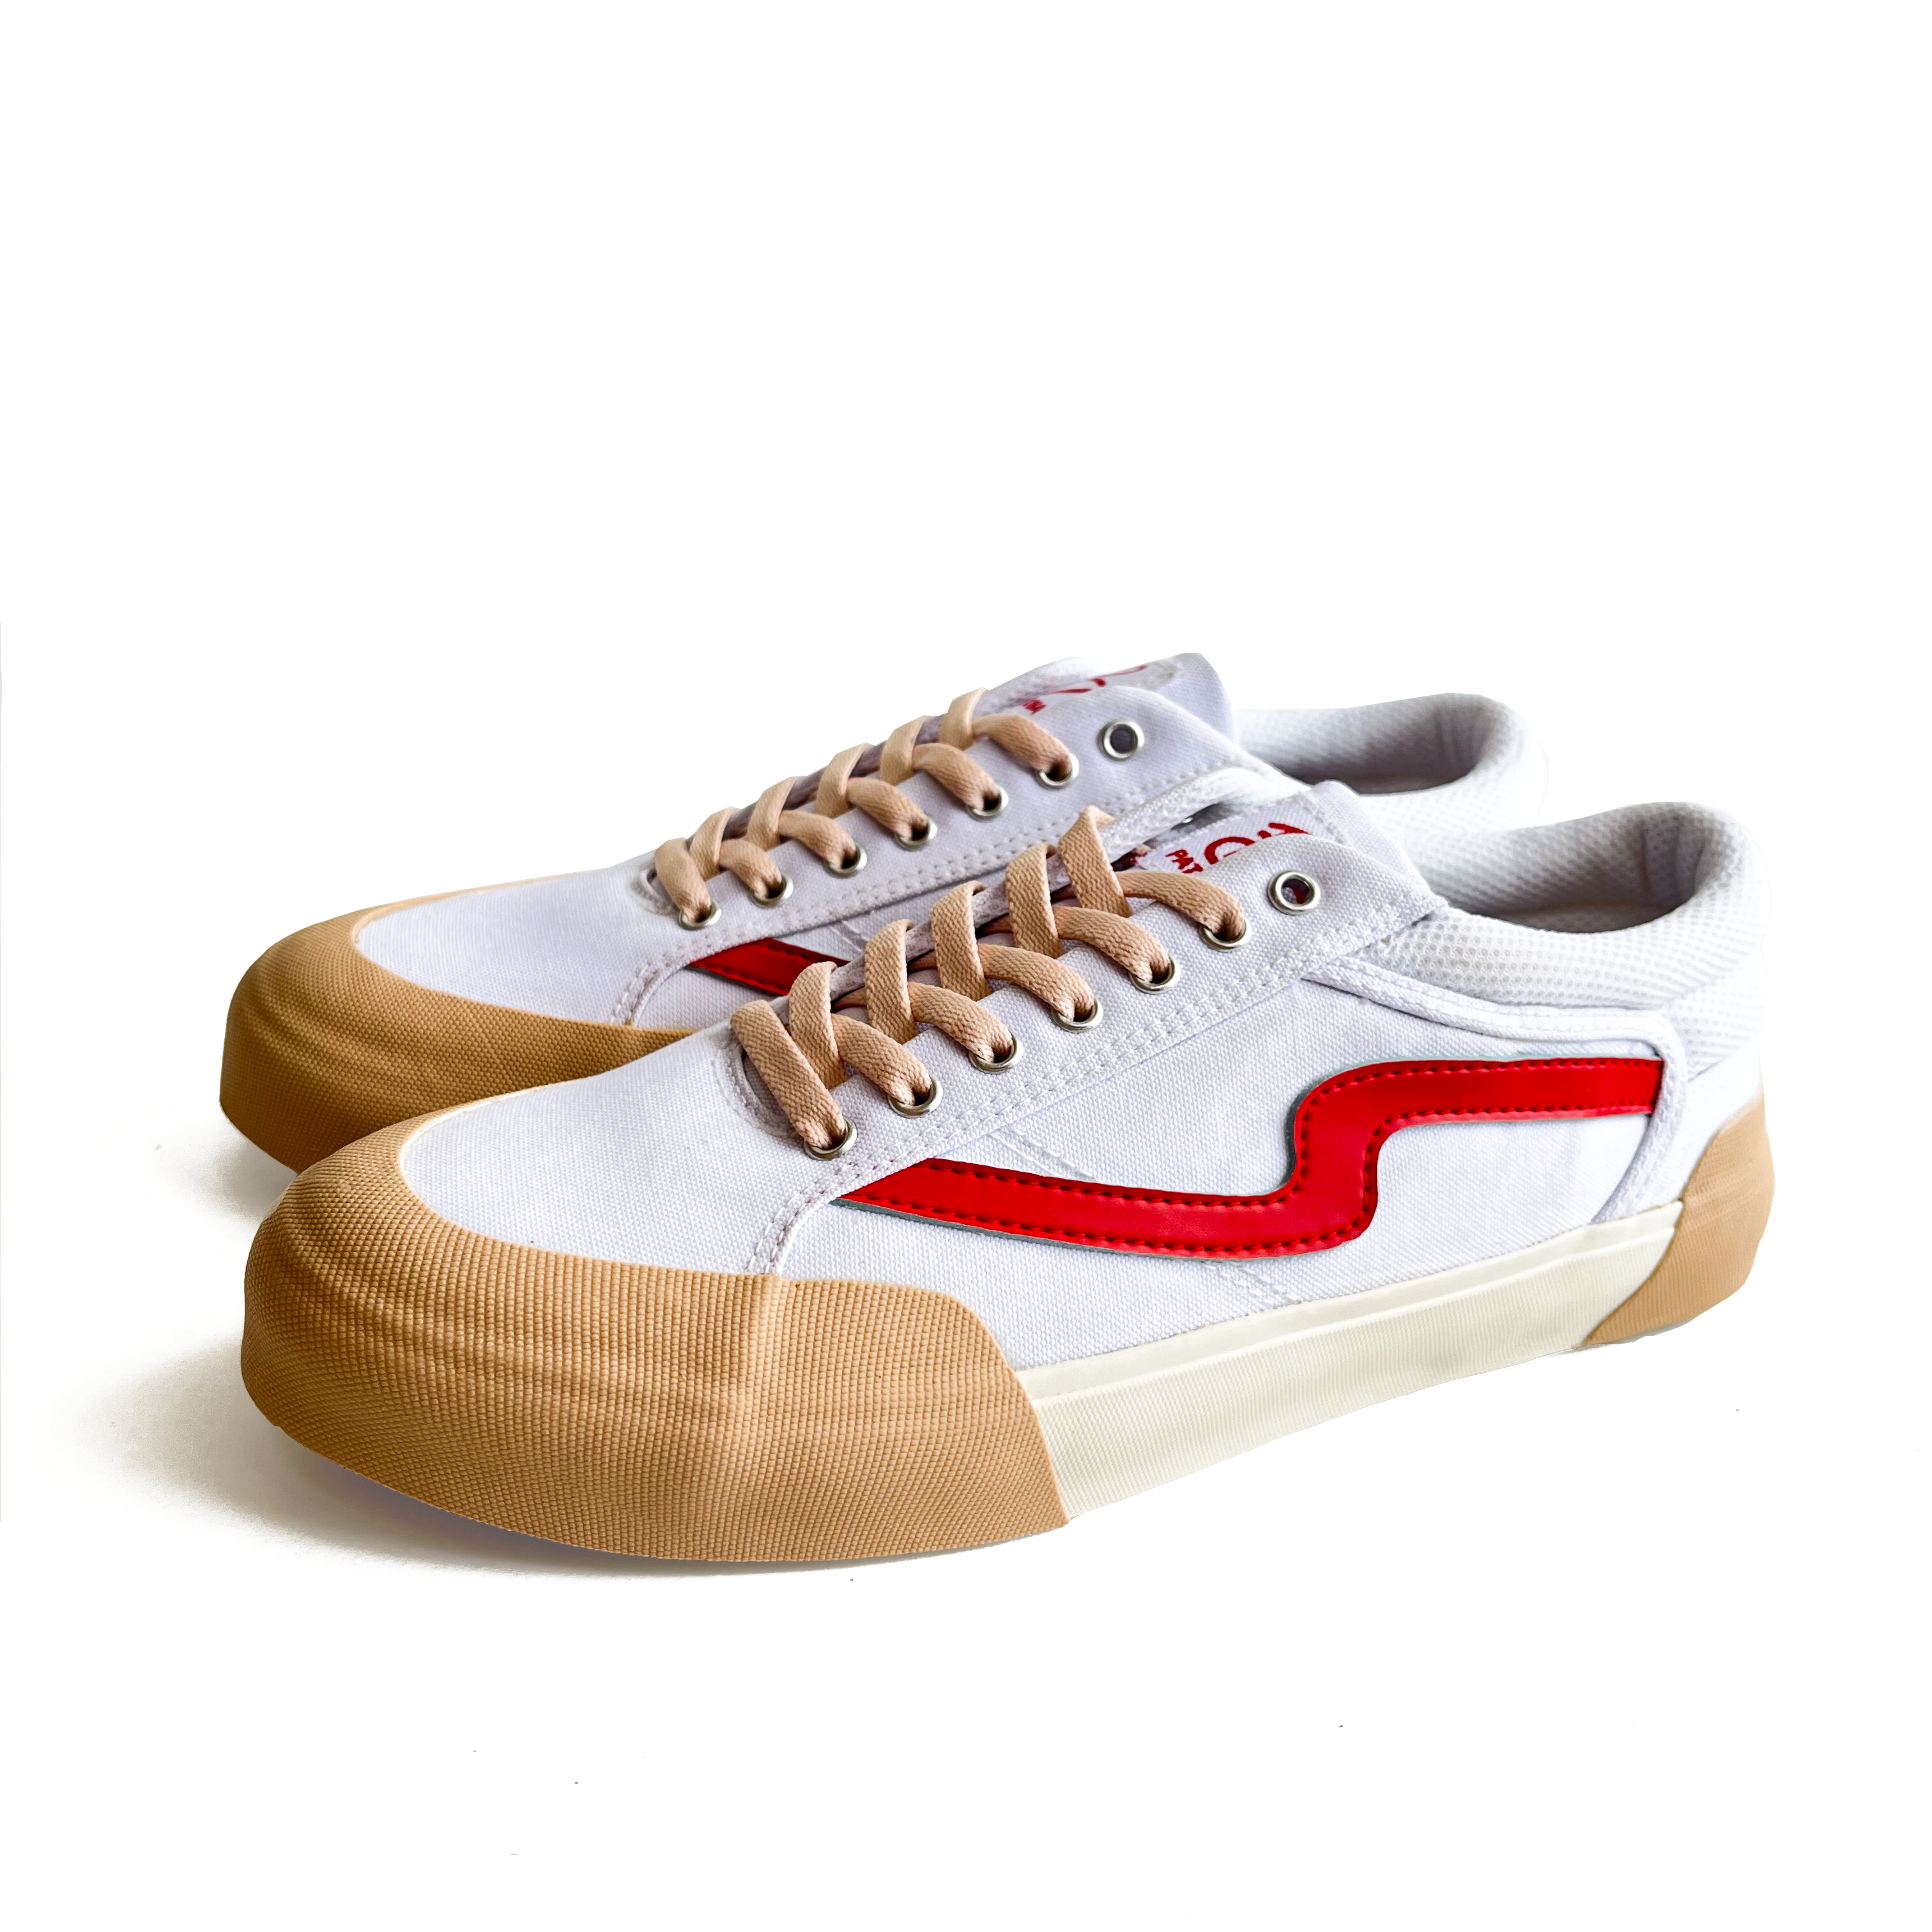 Cloud White Red Sneakers